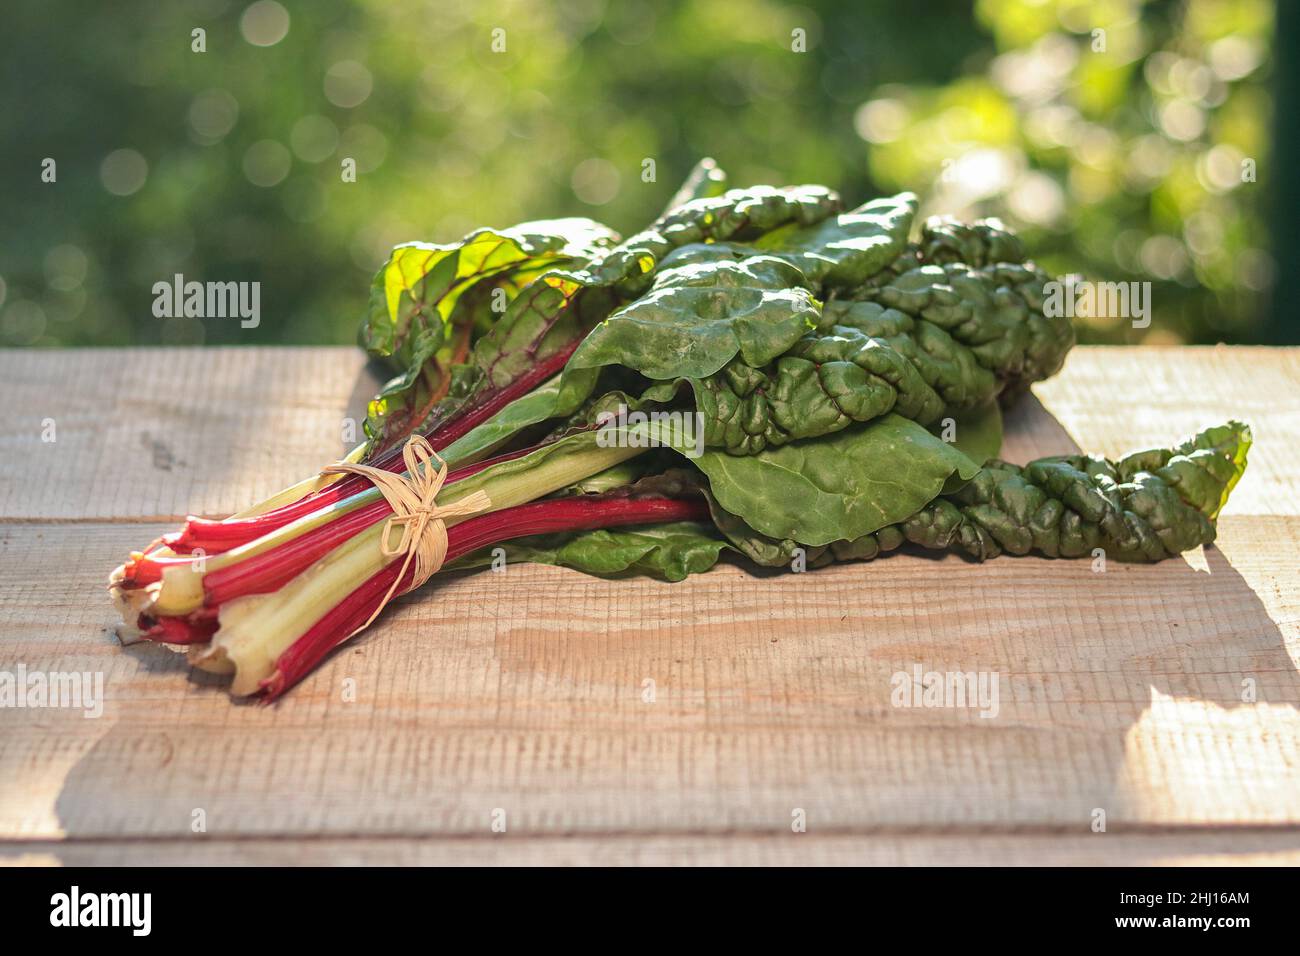 Chard vegetable - a bunch of leaves with red and green stems Stock Photo